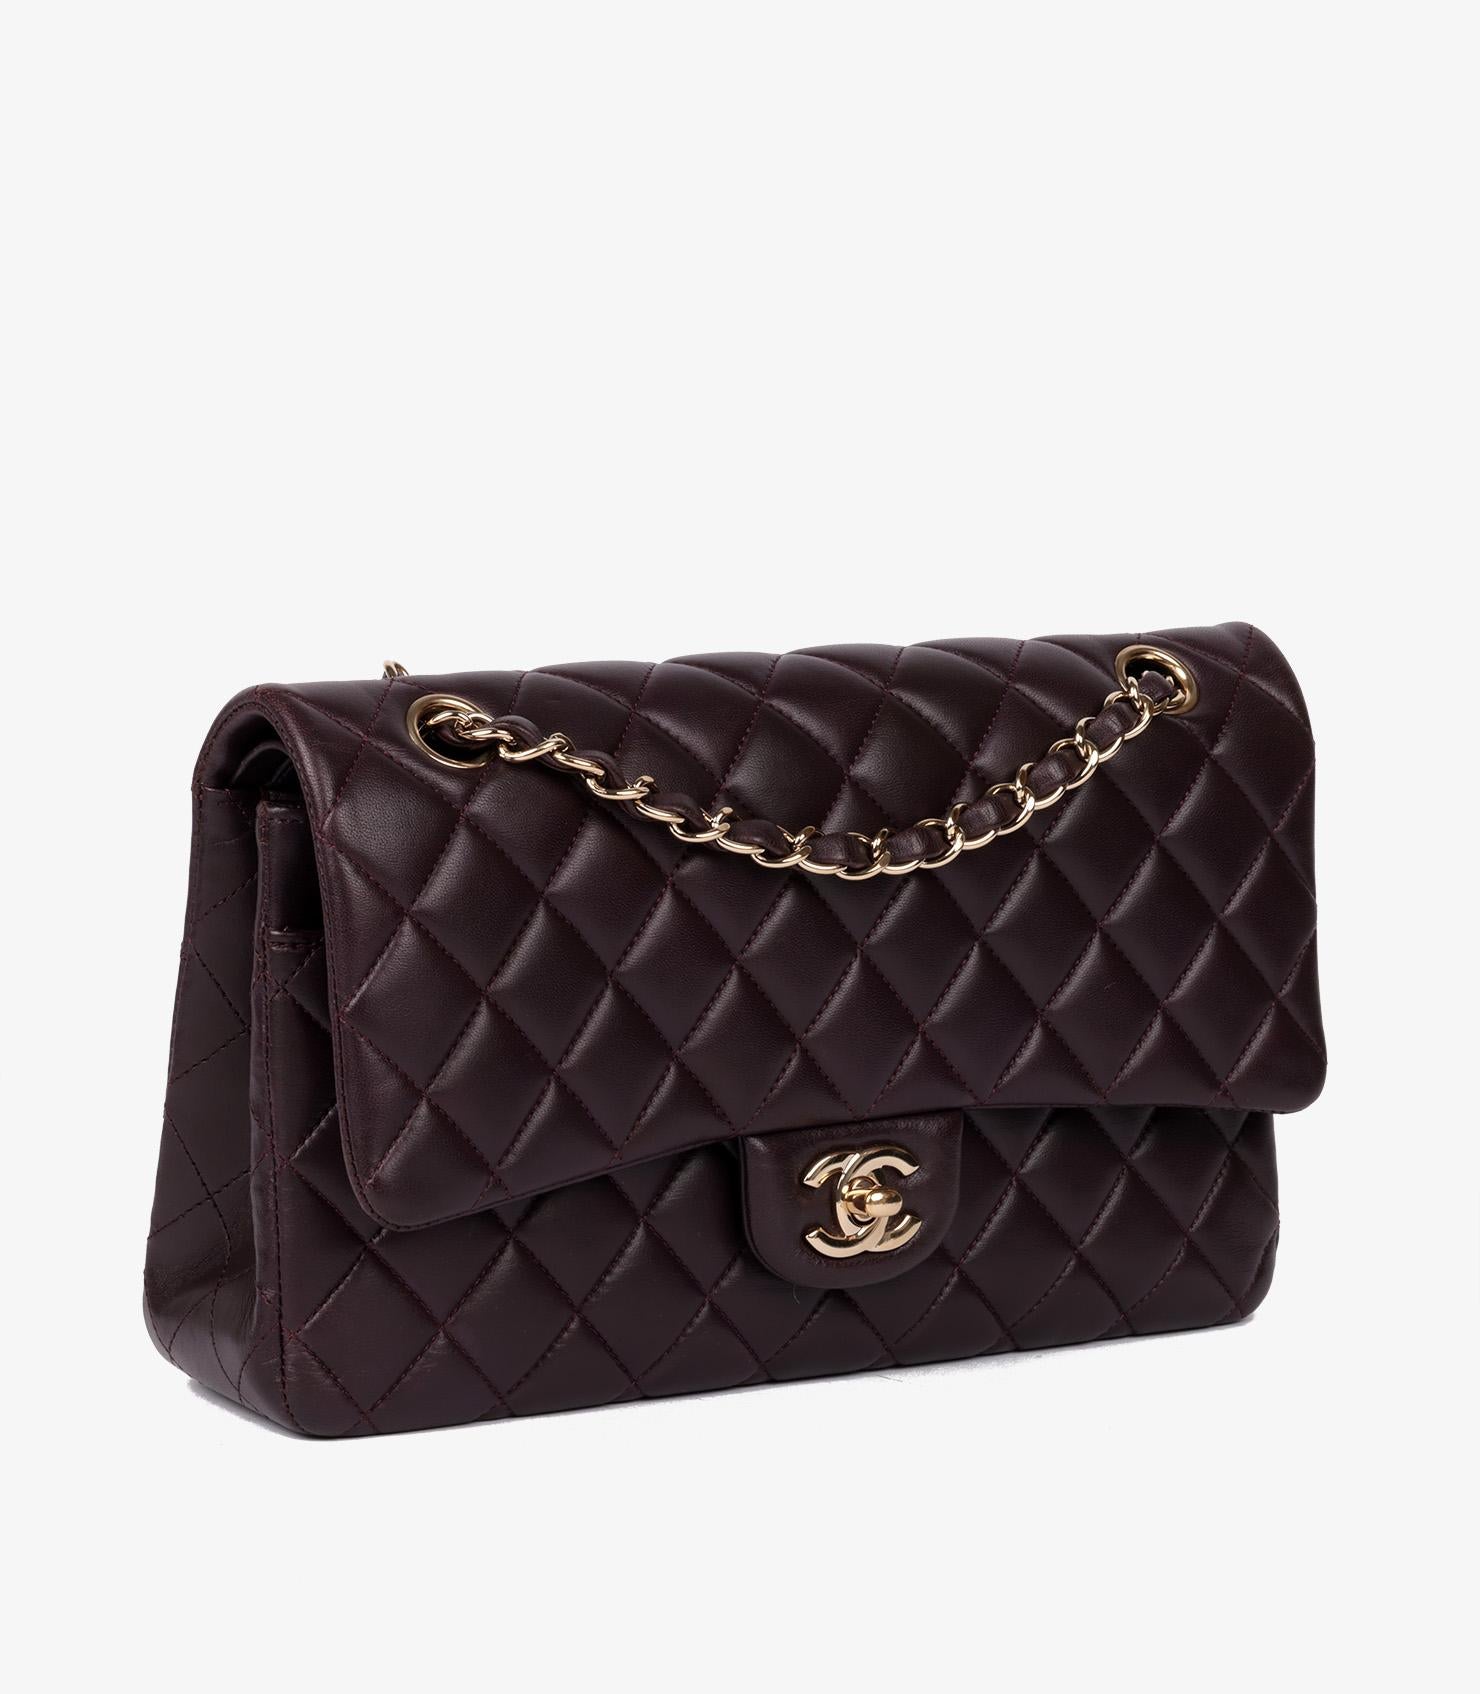 Chanel Purple Quilted Lambskin Medium Classic Double Flap Bag In Excellent Condition For Sale In Bishop's Stortford, Hertfordshire